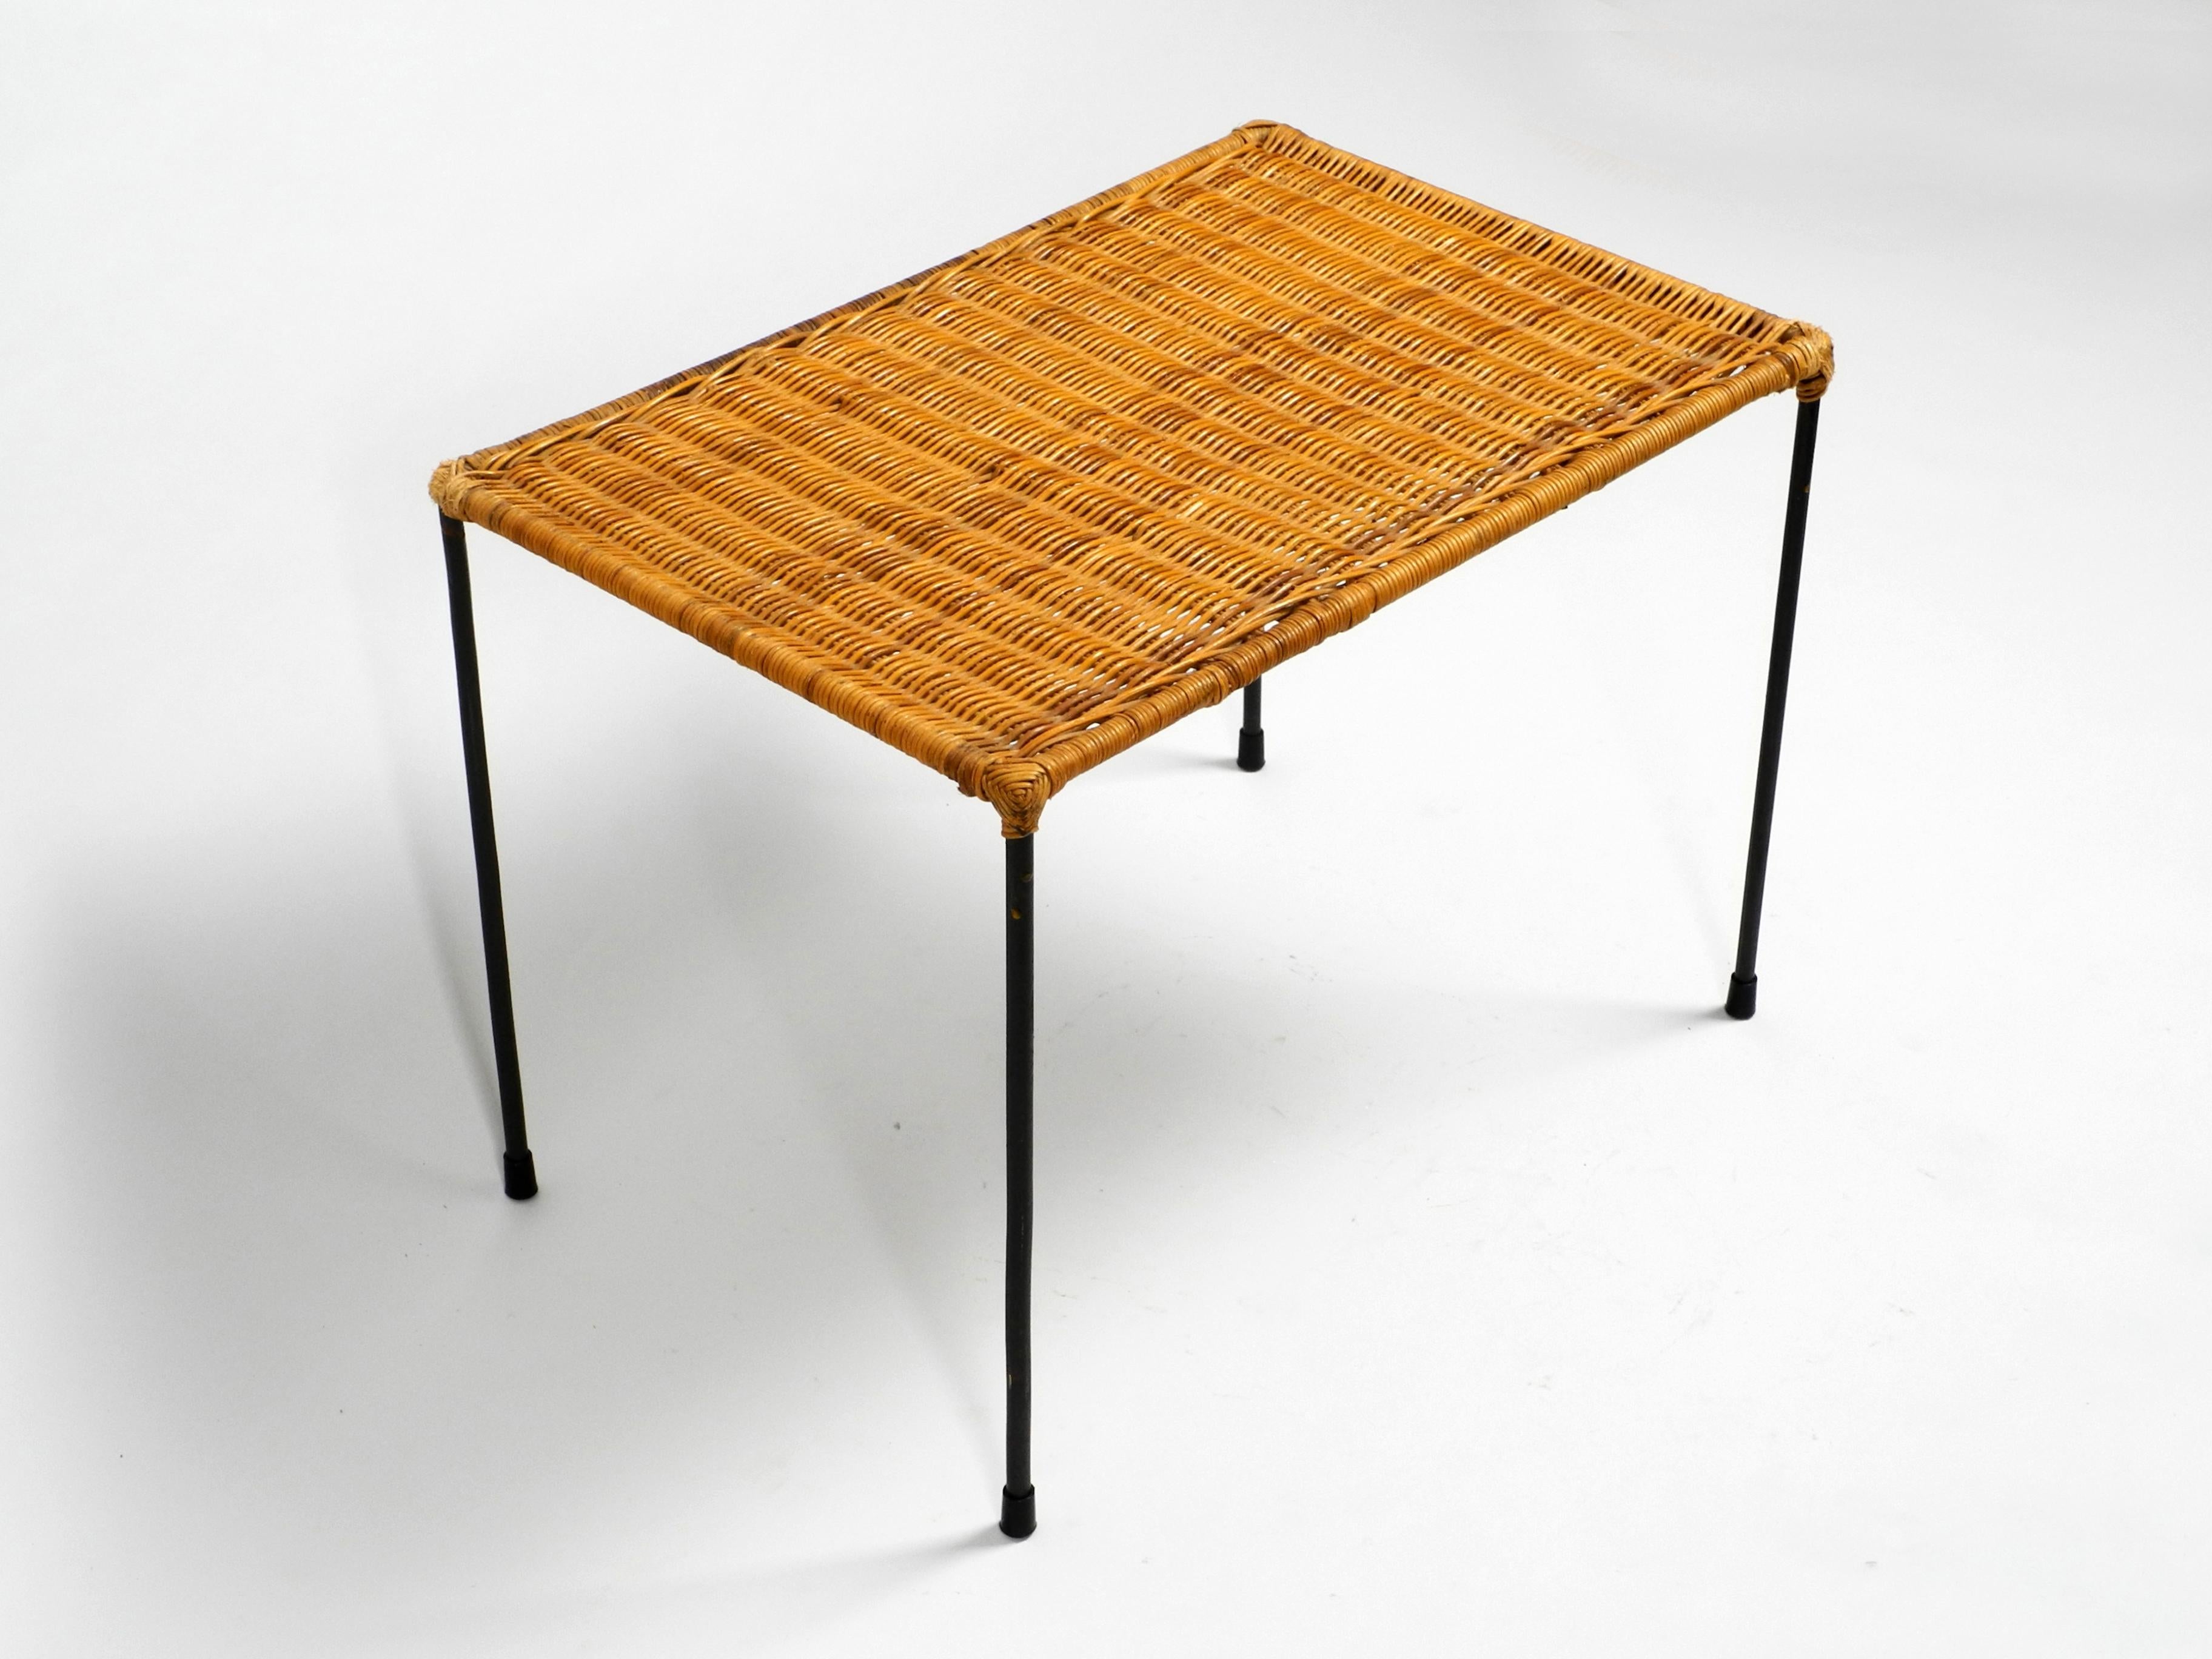 Beautiful Mid-Century Modern side table made of rattan with a iron frame. 
The frame and feet are made entirely of black painted iron.
Very high quality minimalist 1950s string design. Probably from an italian production.
In a very good vintage